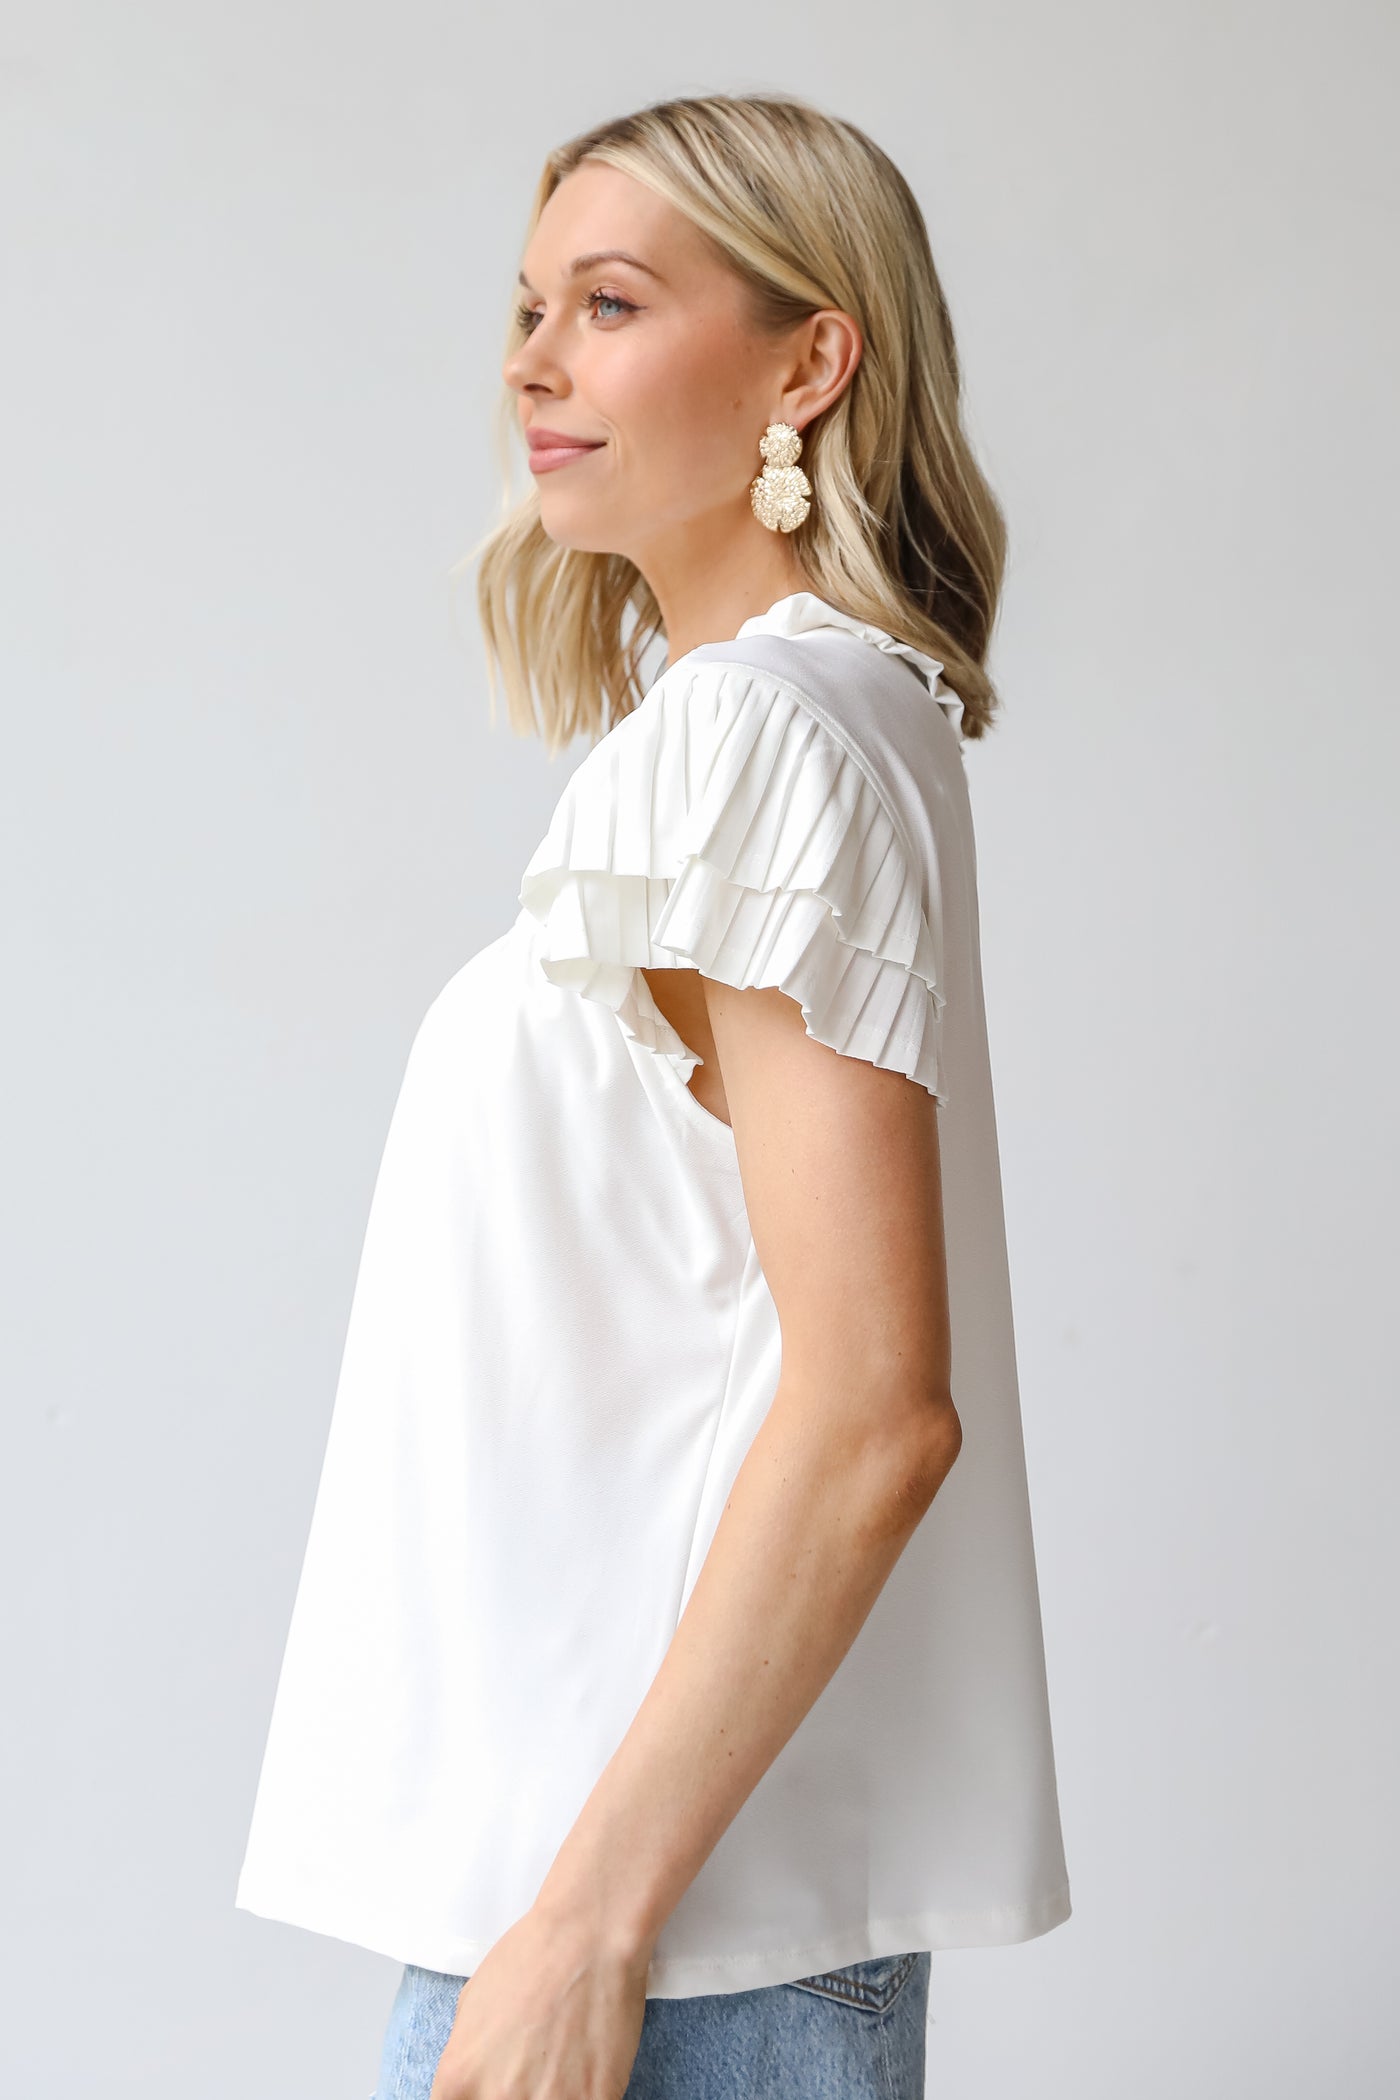 white Blouse side view